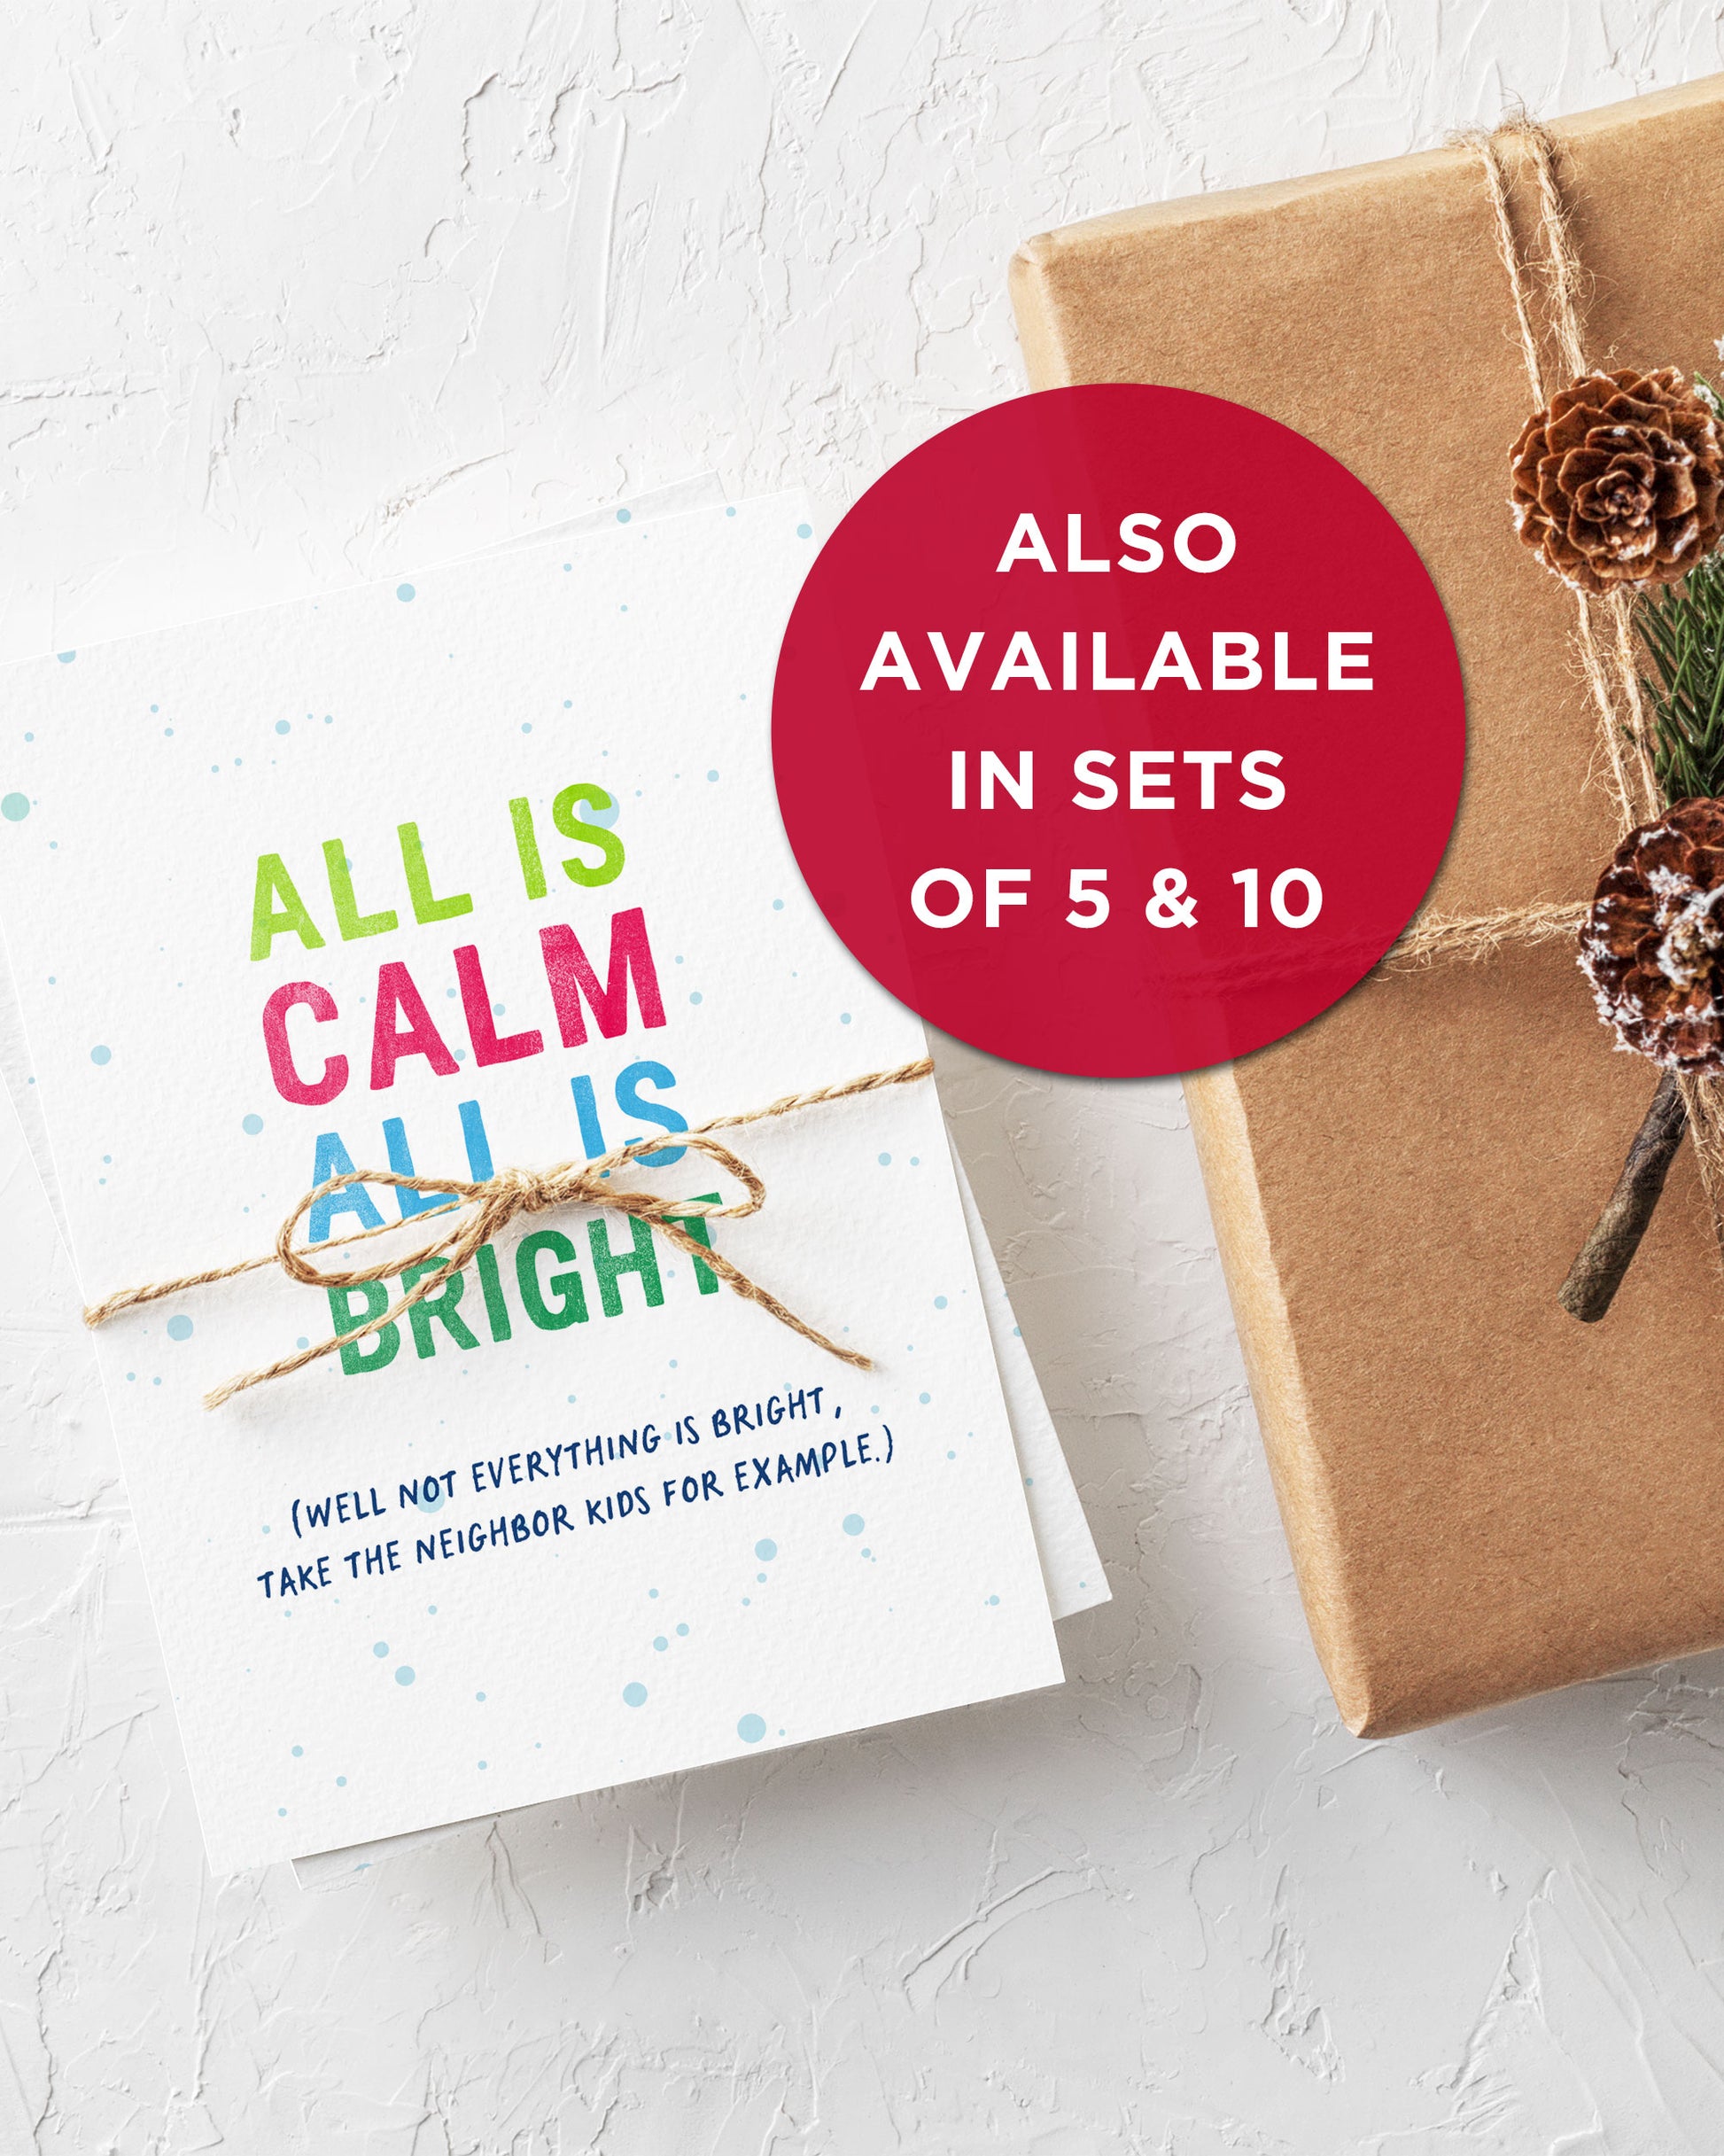 Set of Funny Christmas Cards by Smirkantile. All is Calm All is Bright